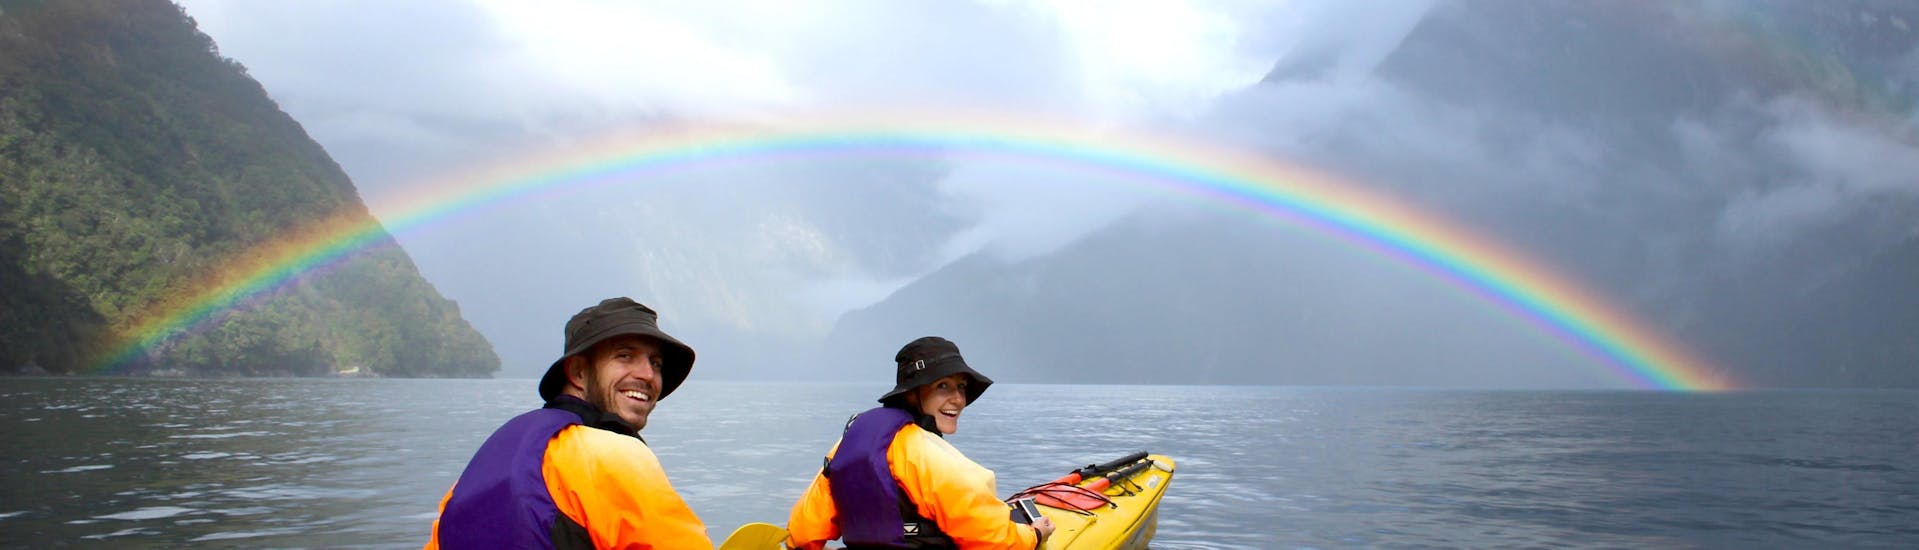 A full rainbow appears on the horizon during Kayak Tour in Milford Sound Fiord organized by Go Orange